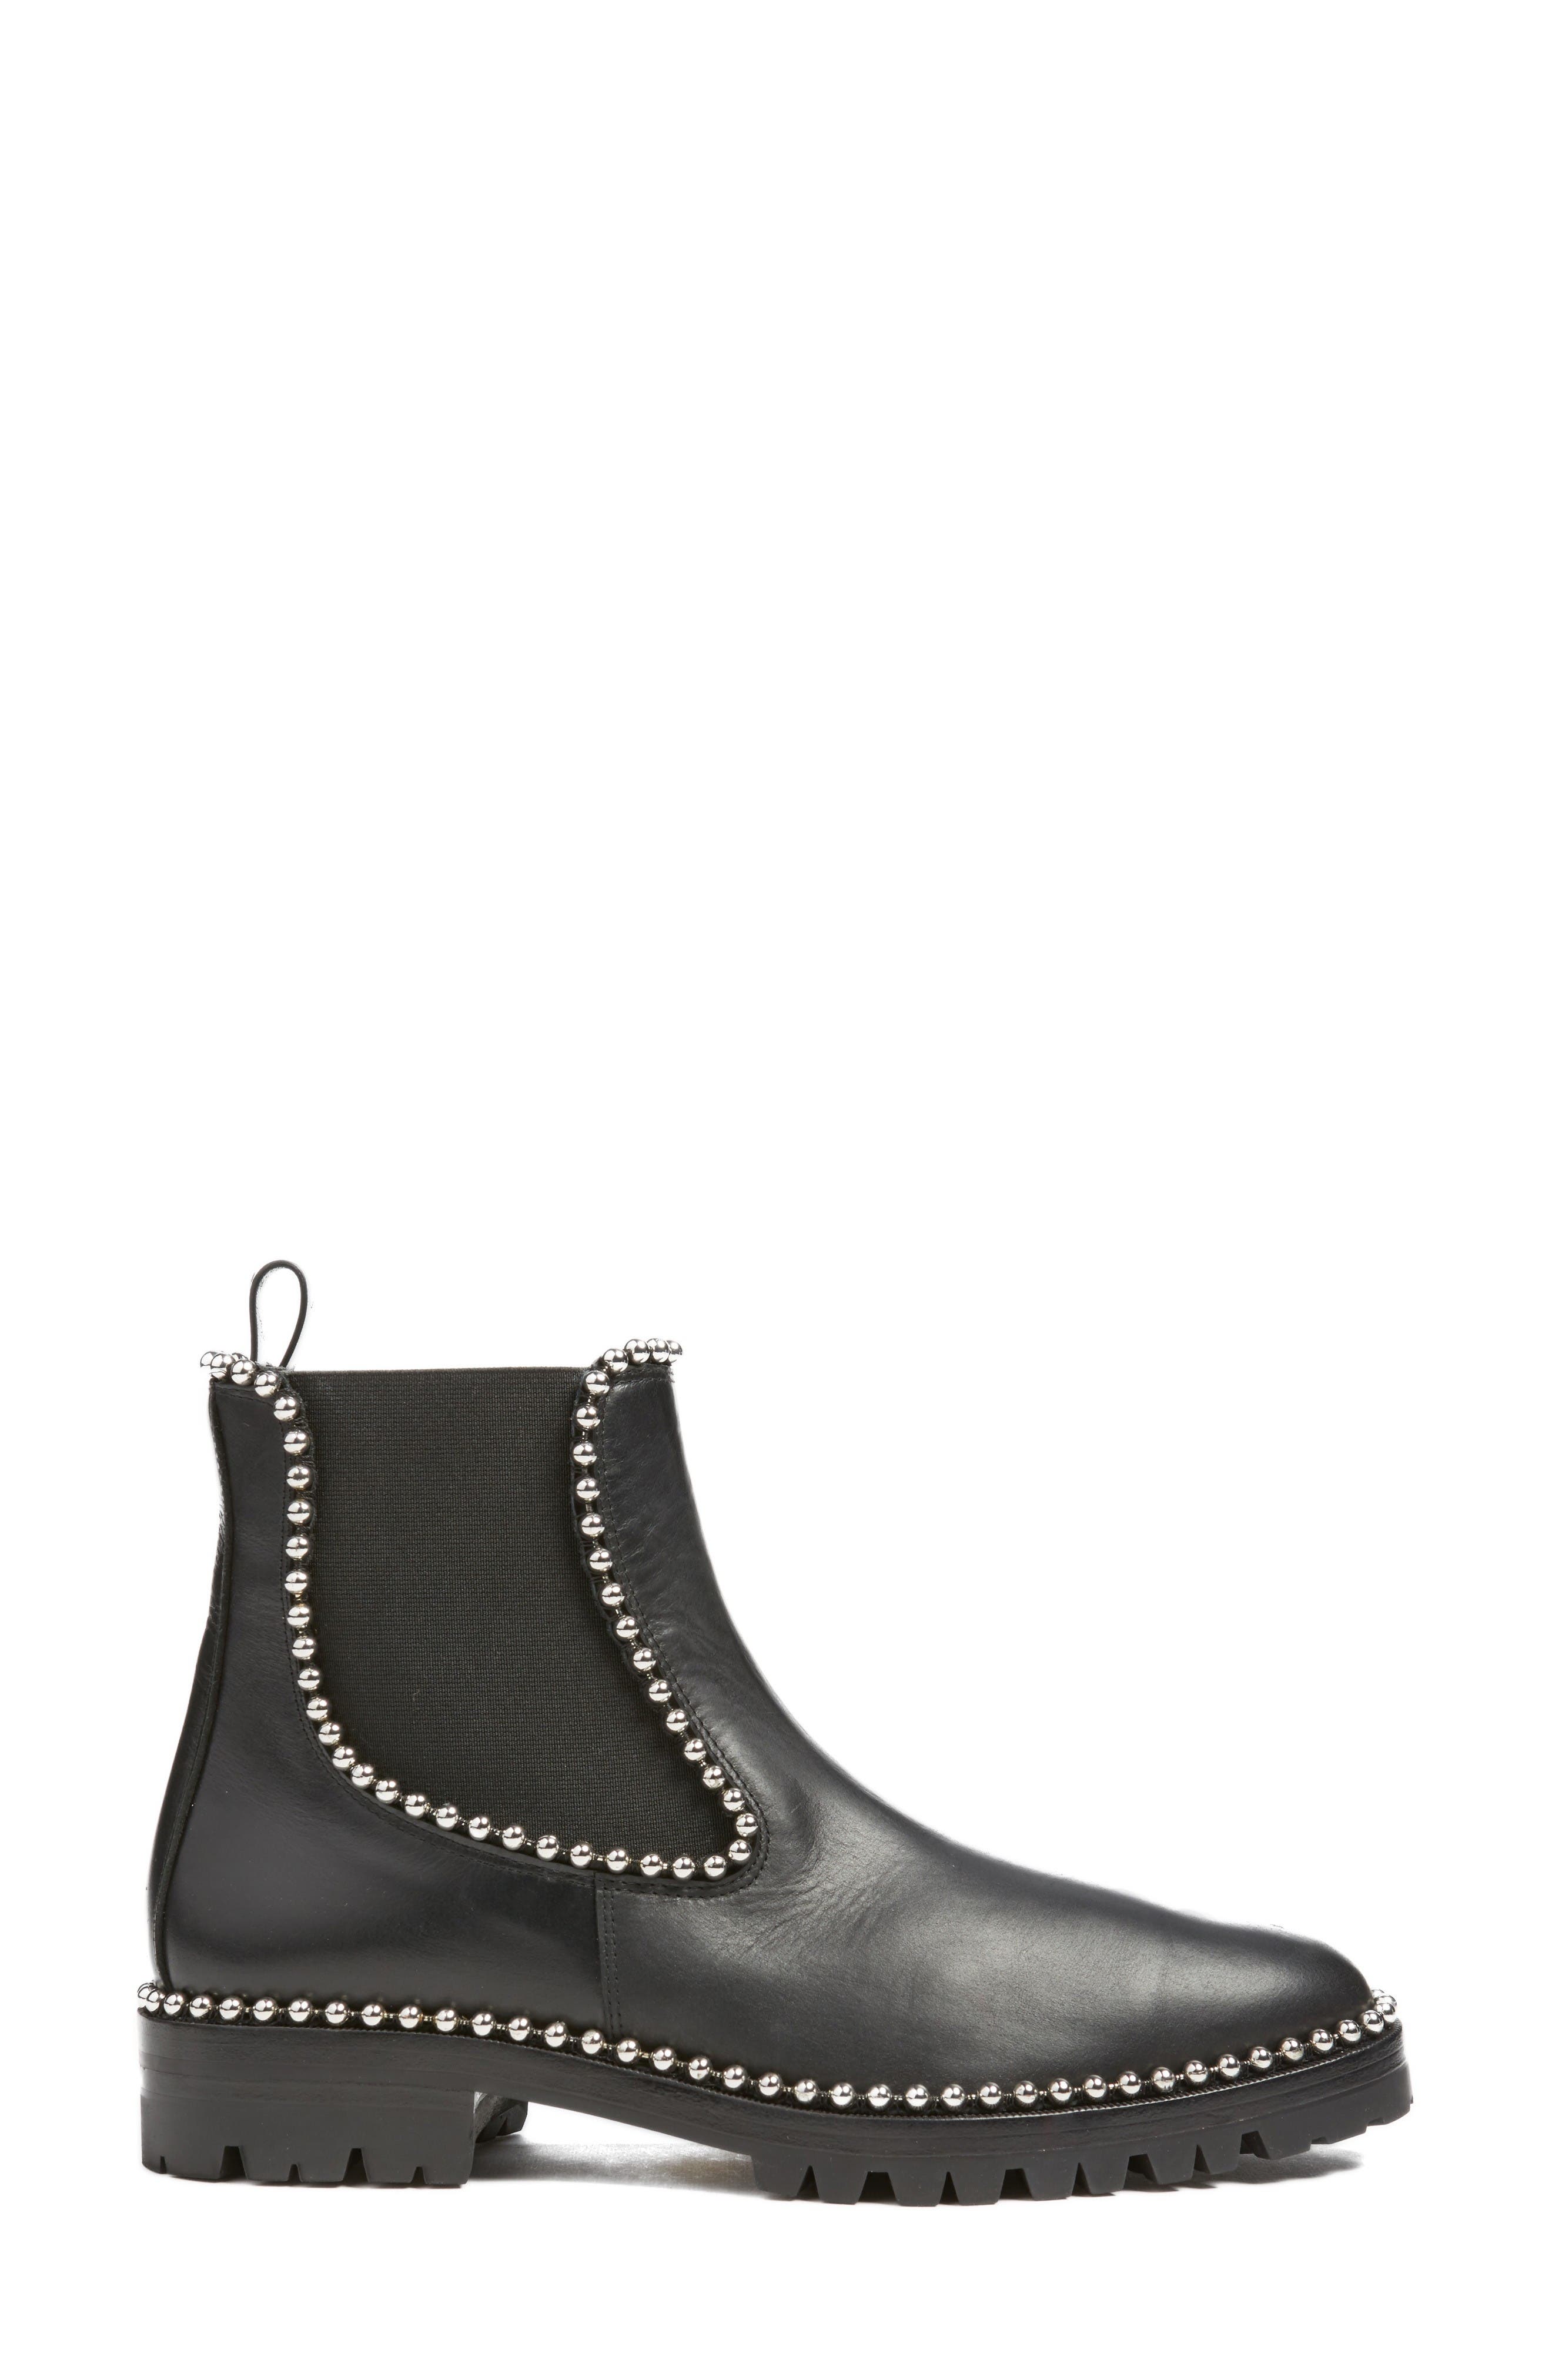 ALEXANDER WANG SPENCER BALL CHAIN-TRIMMED LEATHER CHELSEA BOOTS, BLACK ...